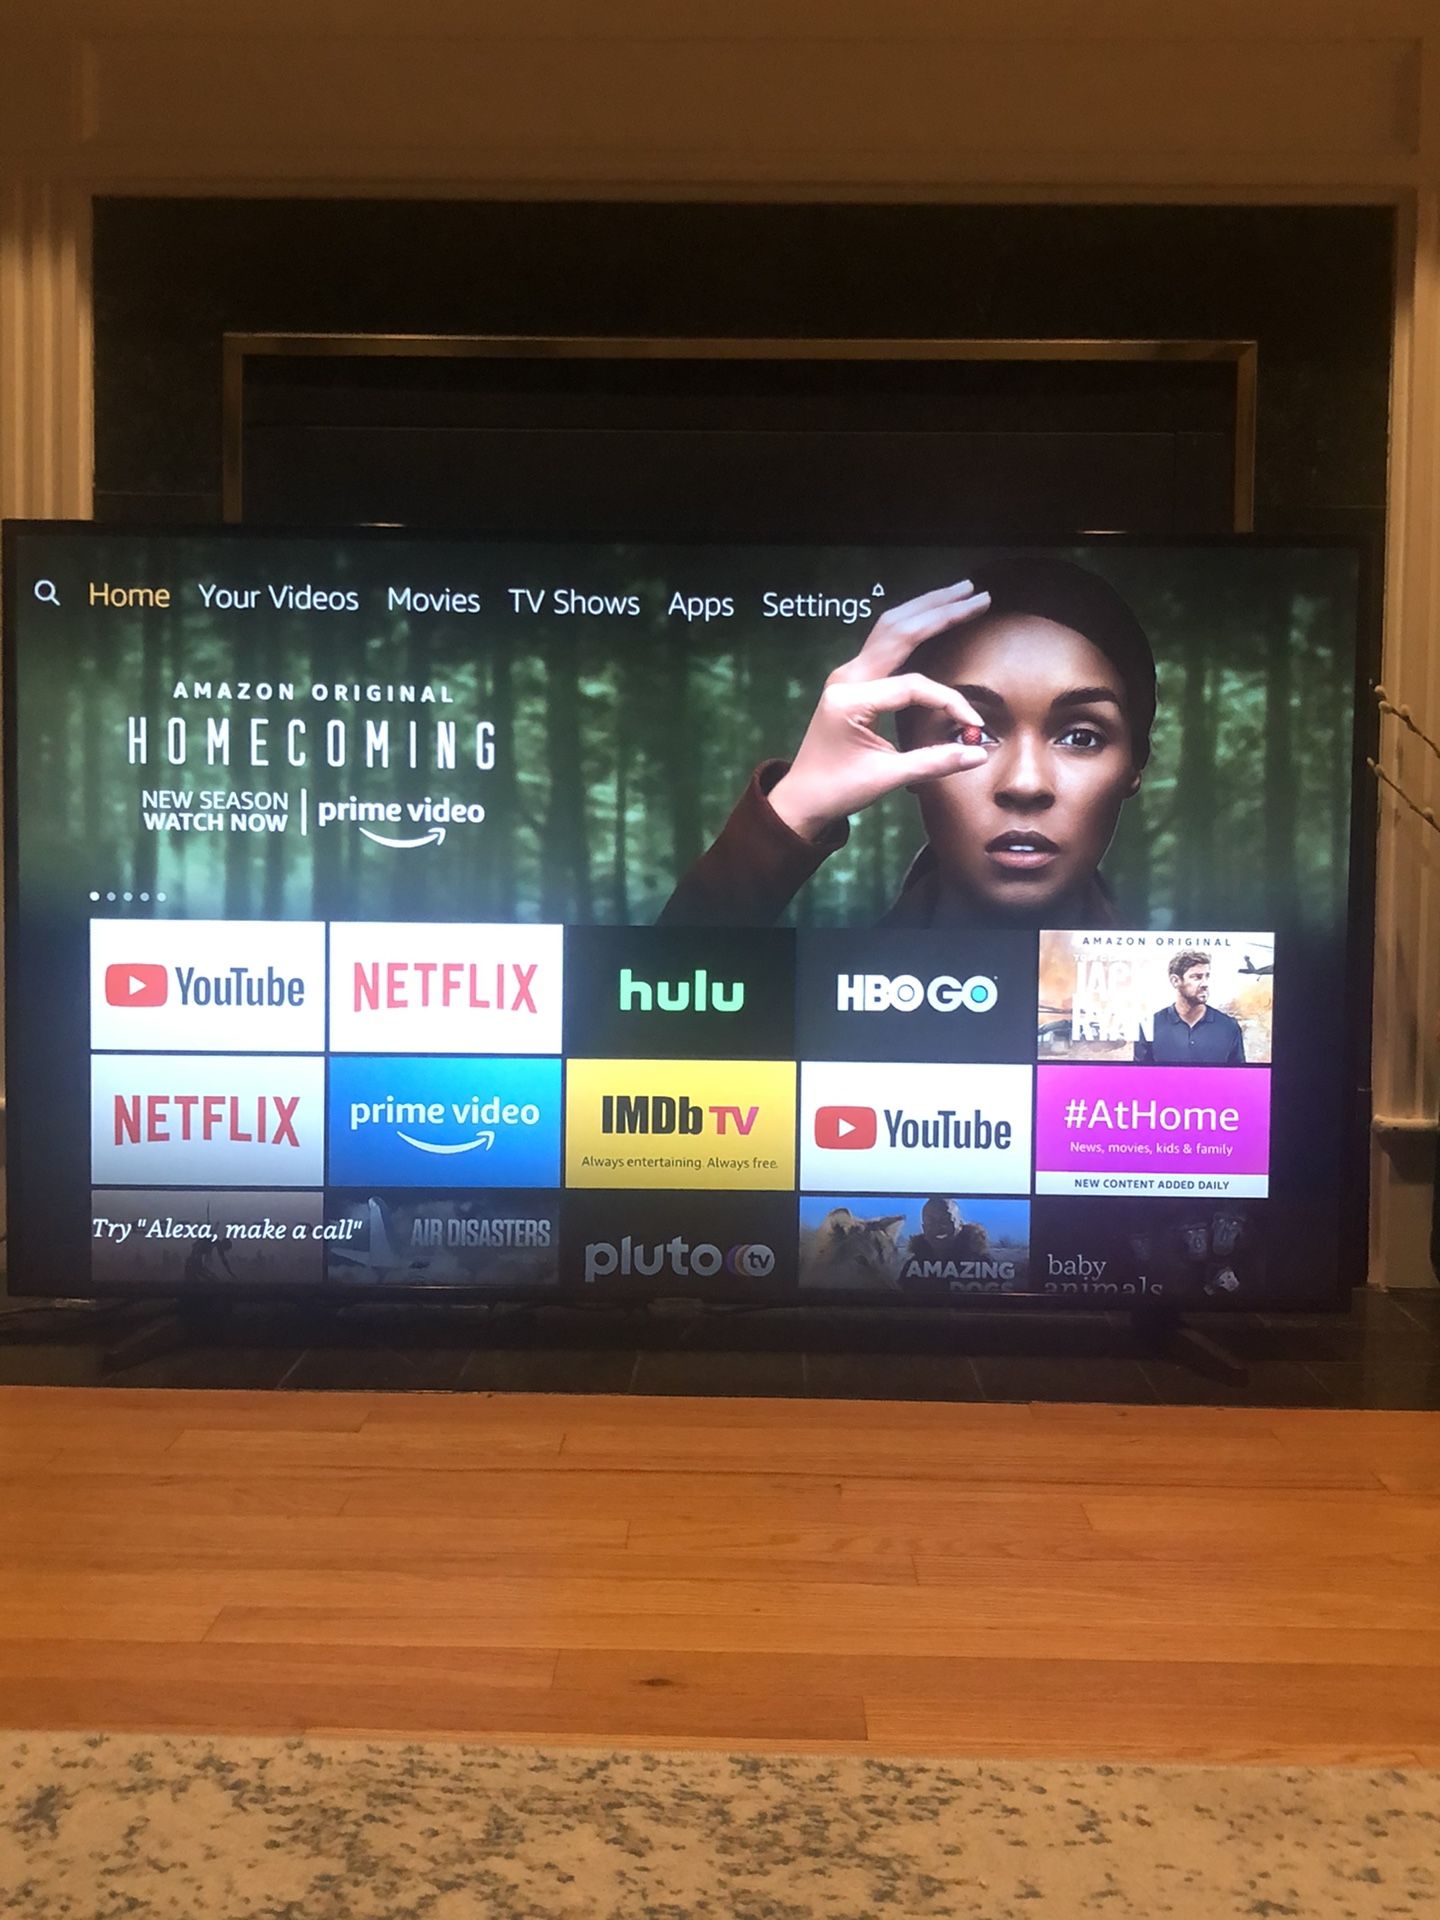 Samsung Smart TV: Brand New! Used for 1 month! 58" Class - LED - 7 Series - 2160p - Smart - 4K UHD TV with HDR